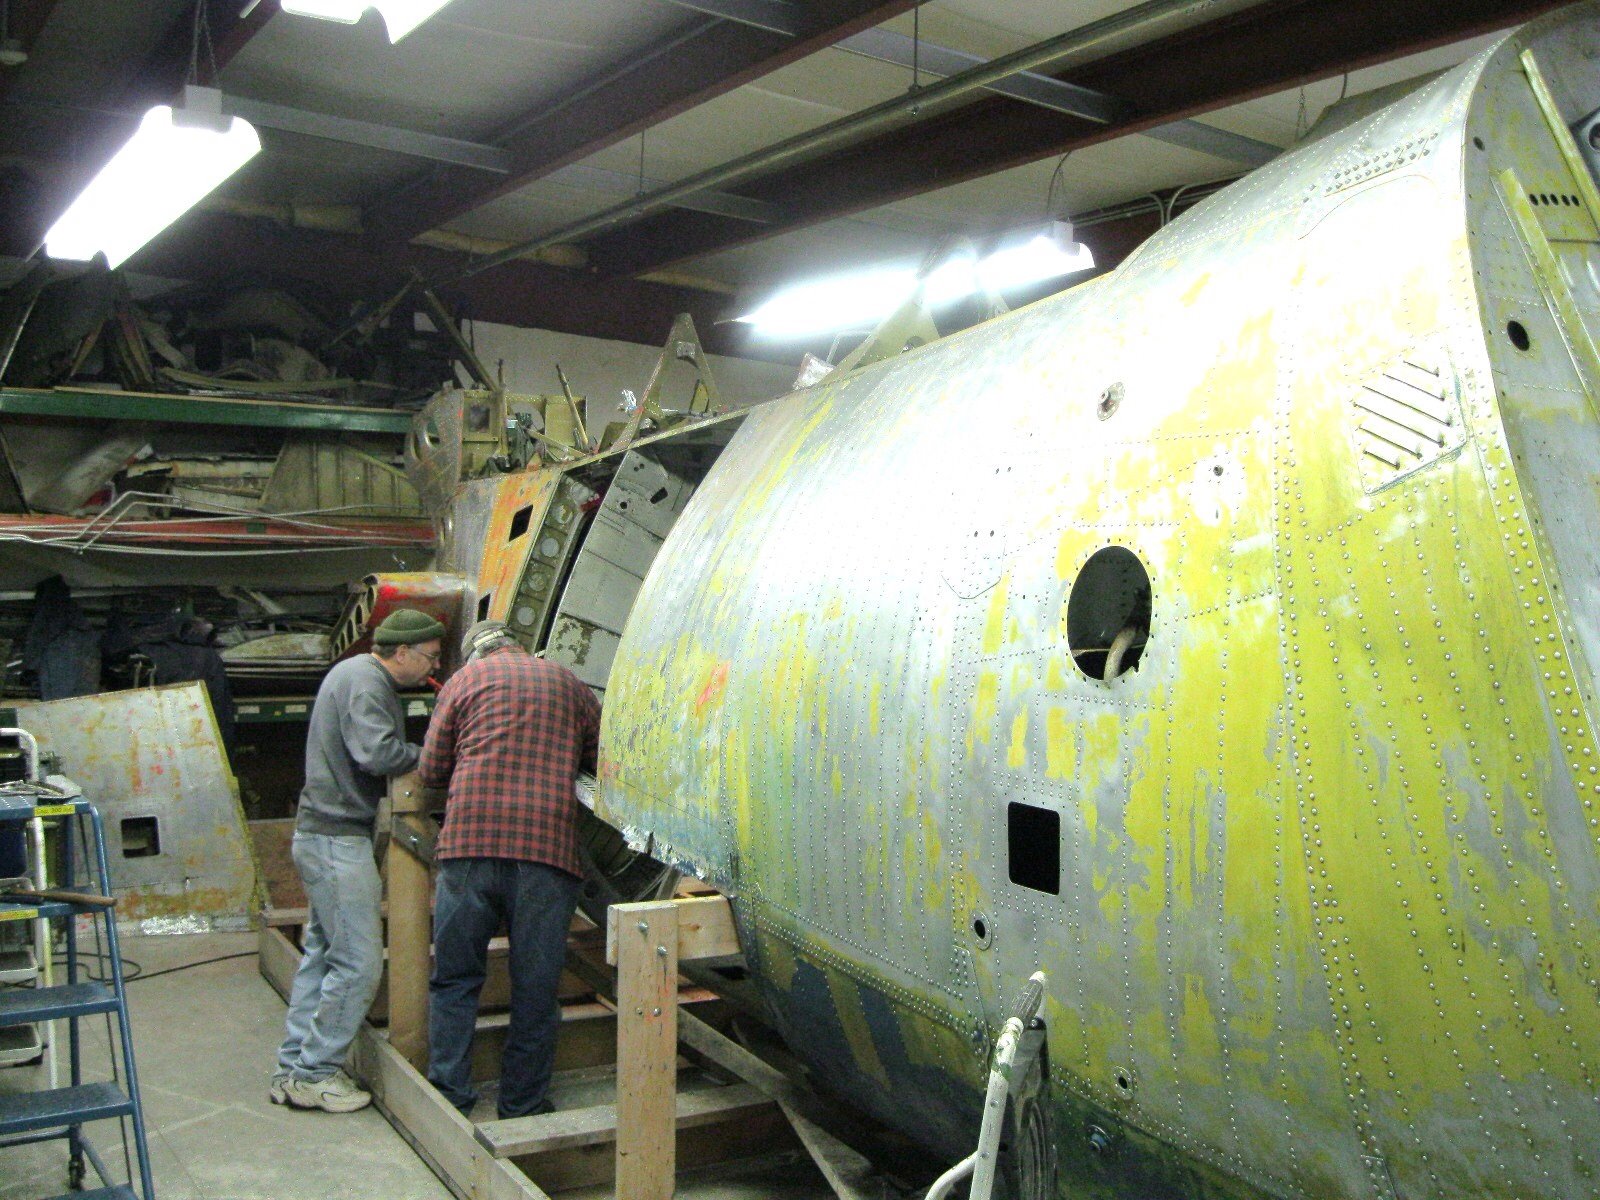 The Piasecki CH-127 under restoration. This aircraft will probably be a composite of several airframes. (GMAM photo)